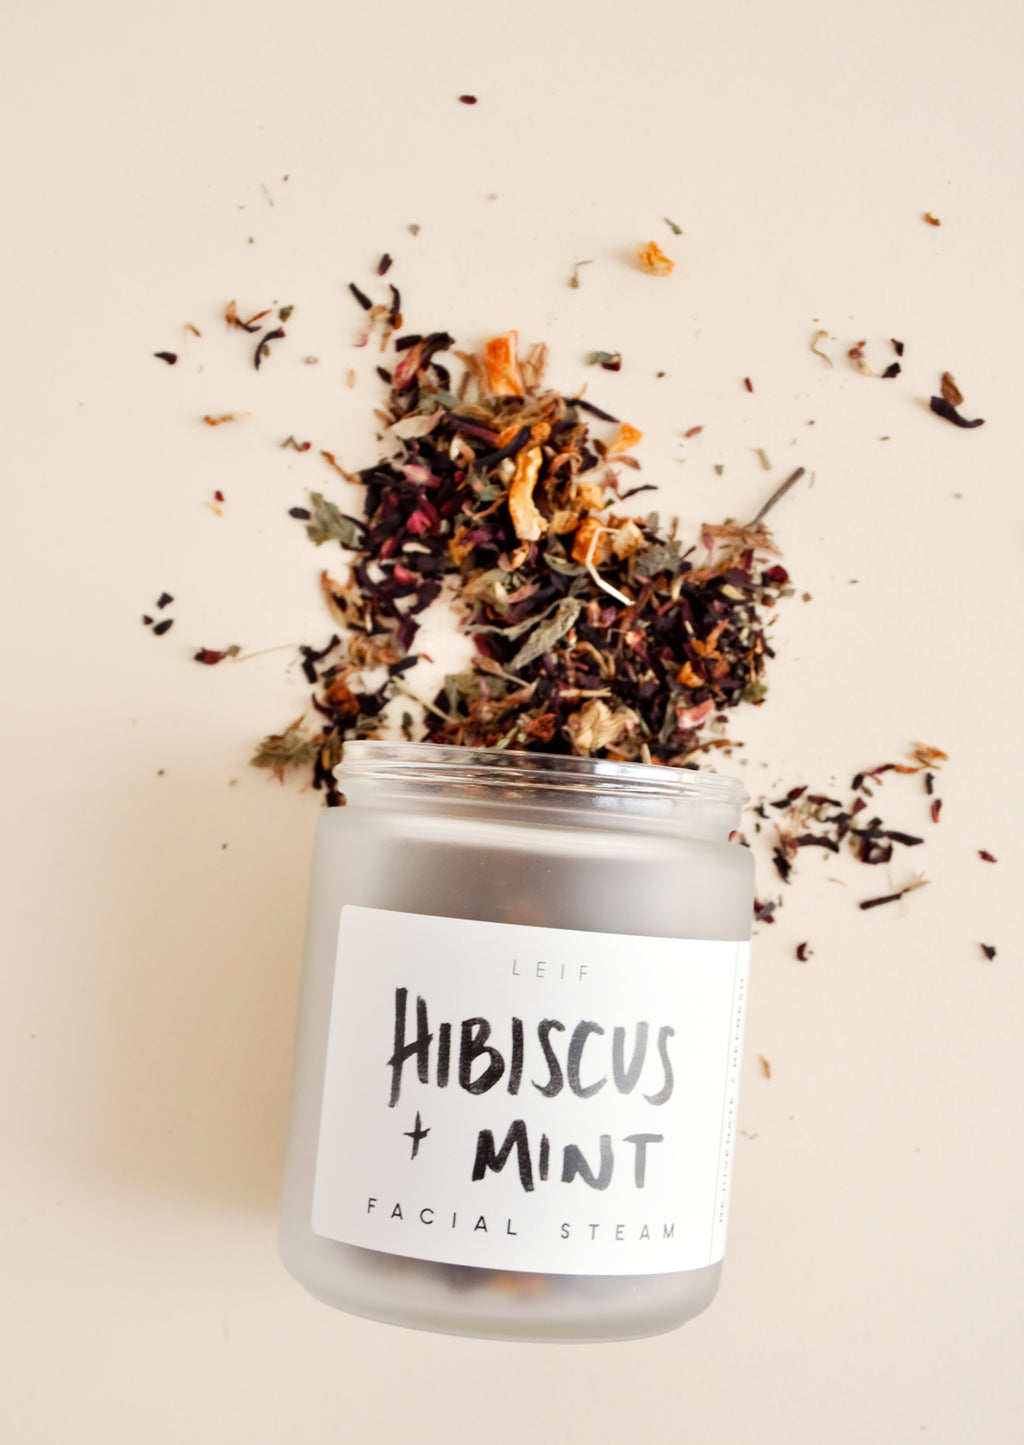 1: A small frosted glass jar with a black and white label spilling out a mix of dried flowers. 